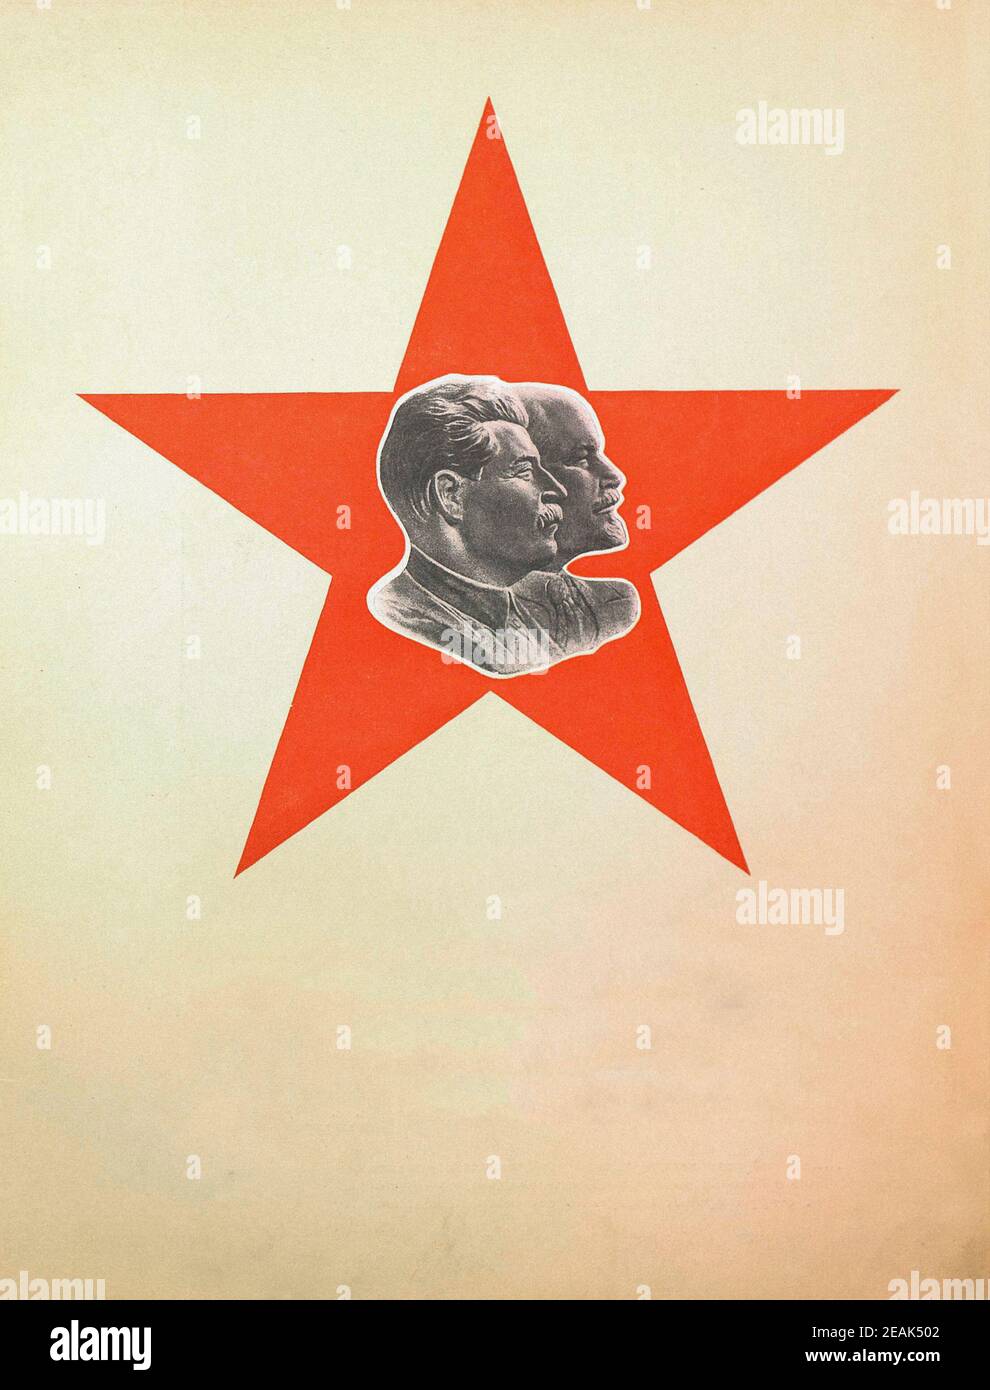 Red Army. From soviet propaganda book of 1937. Soviet leaders Lenin and Stalin on the background of the red star. Stock Photo